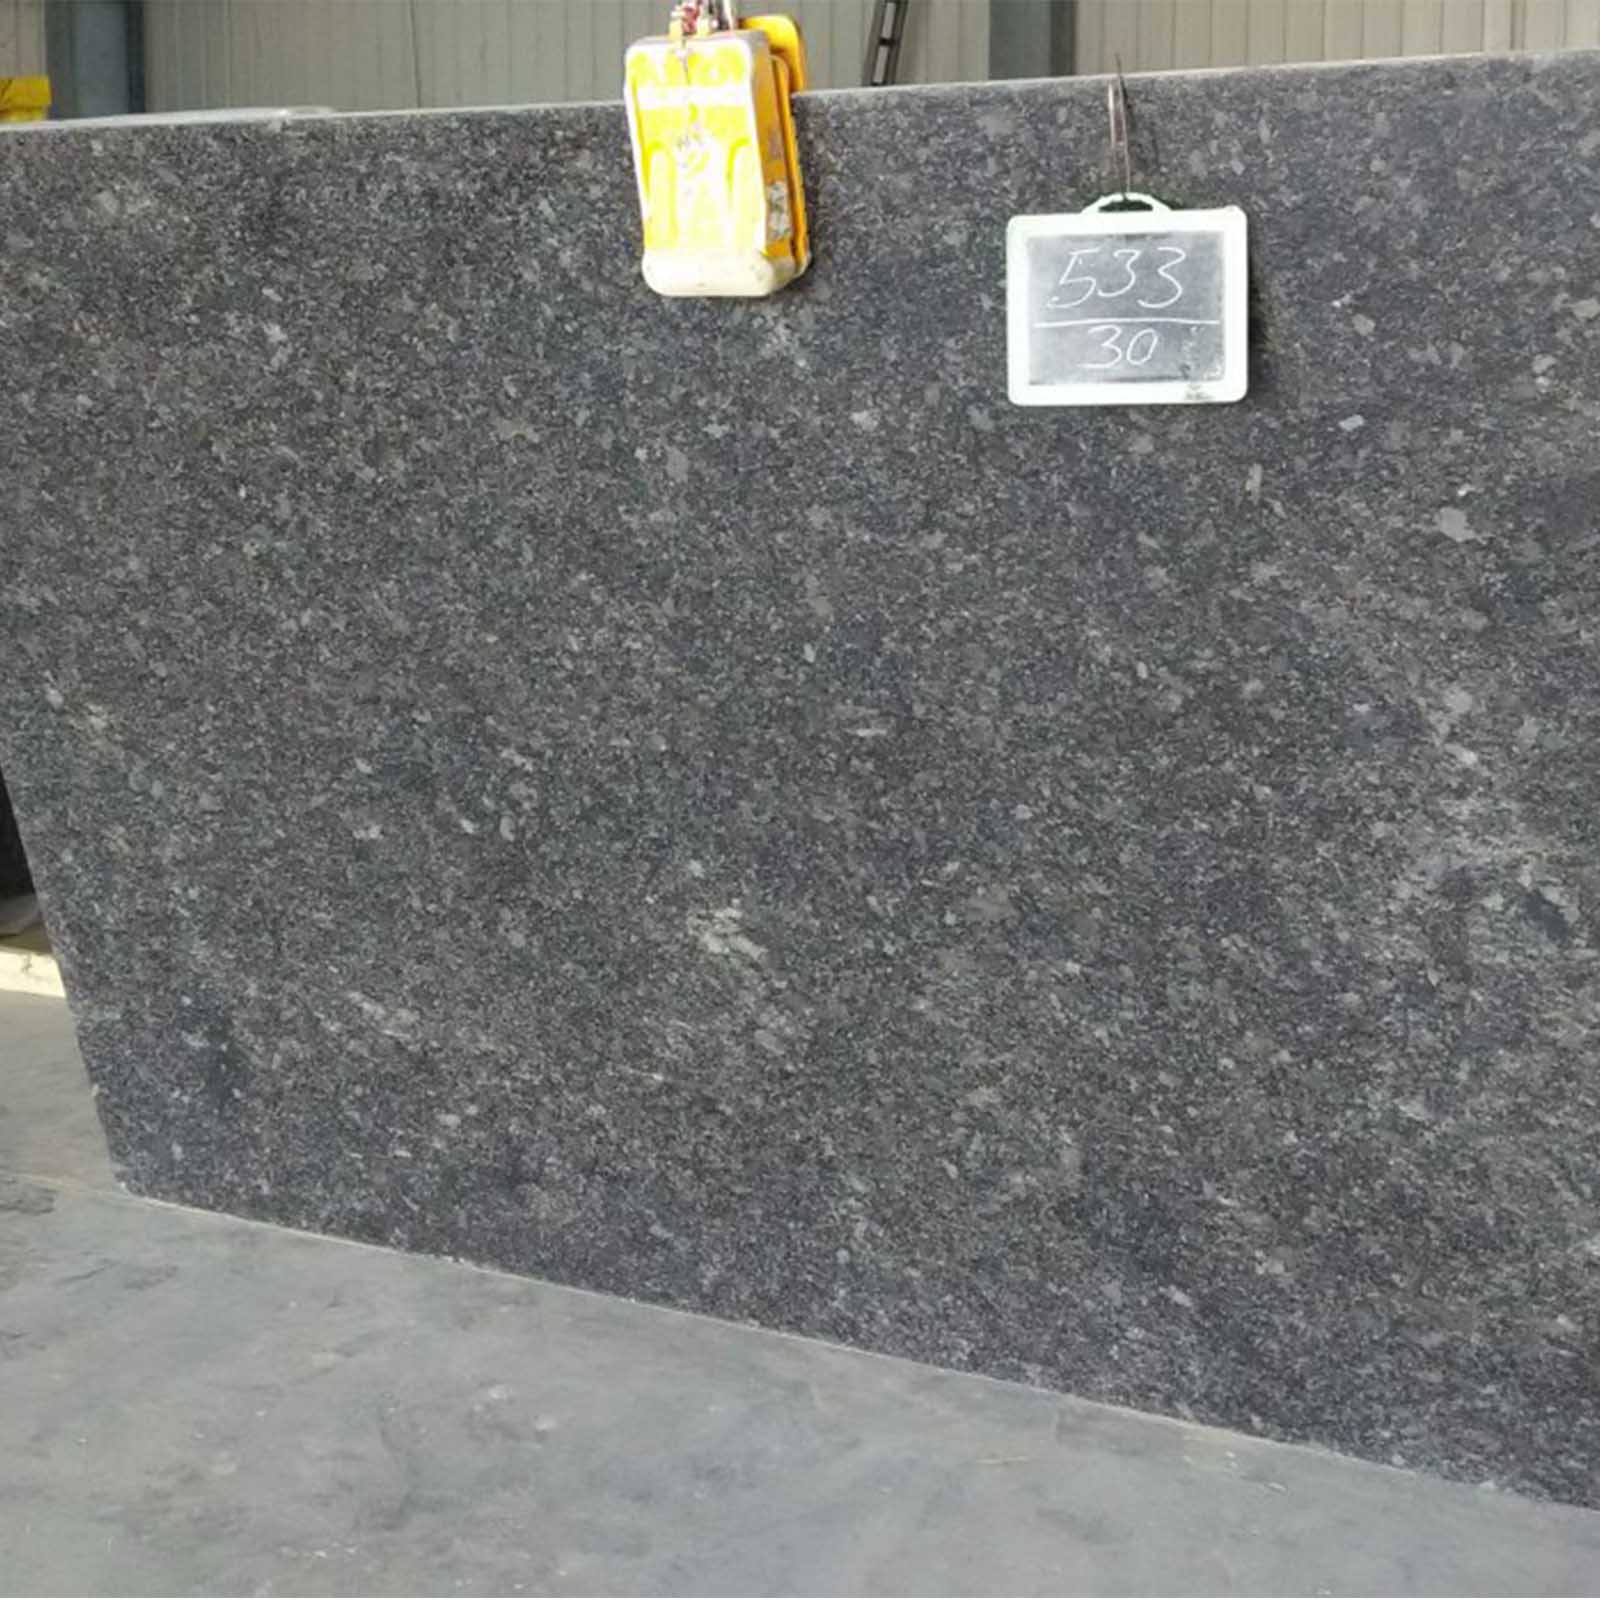 Steel Grey Granite: An Affordable Granite from India That Never Goes Out of  Style!